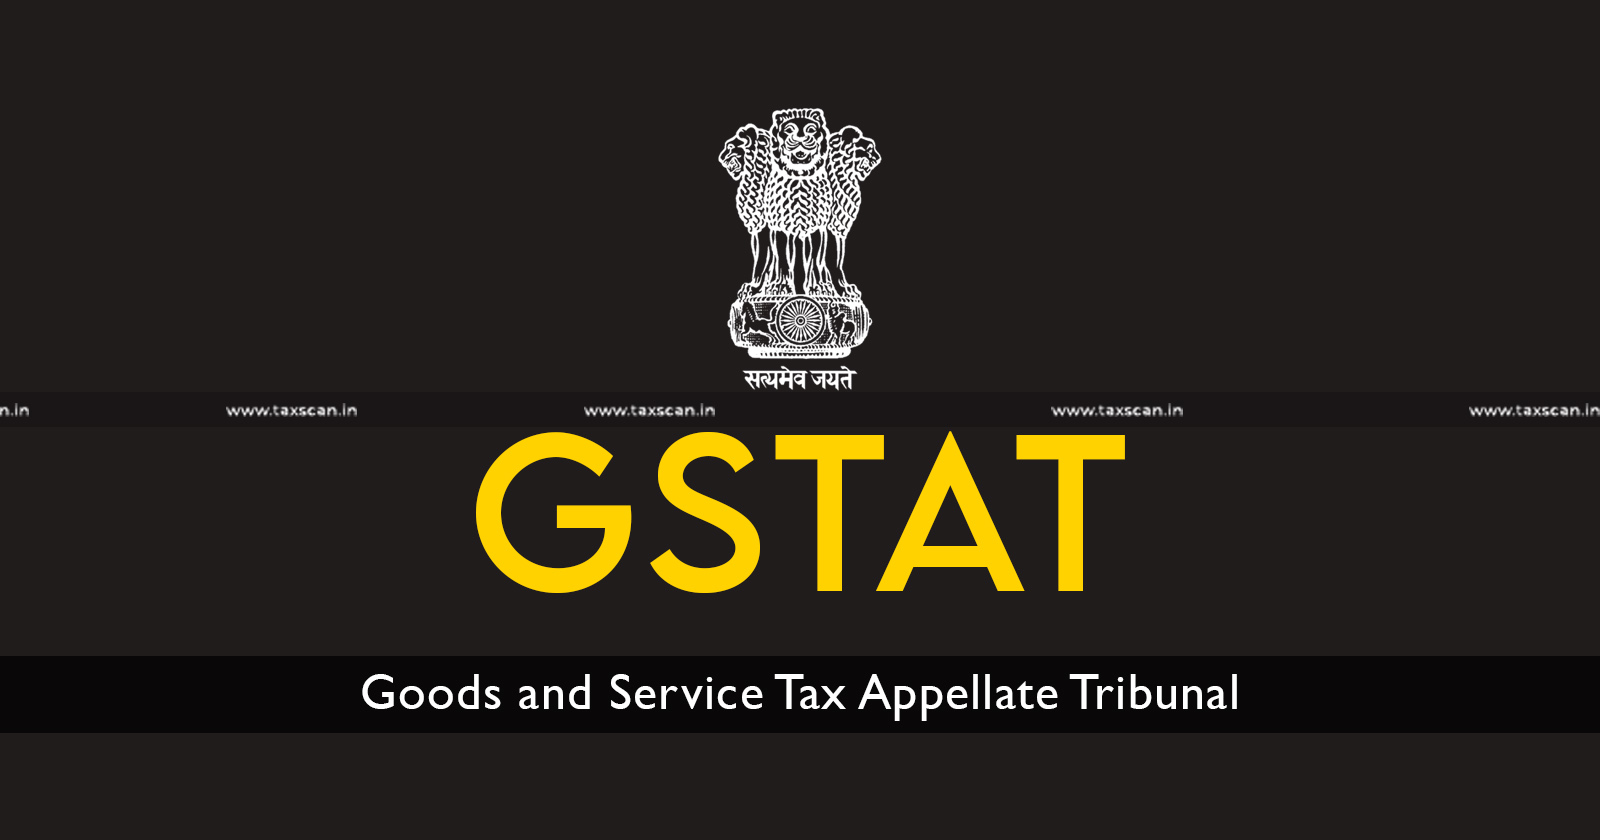 Constitution of State GSTATs - Finance Ministry notifies - across the Nation - TAXSCAN